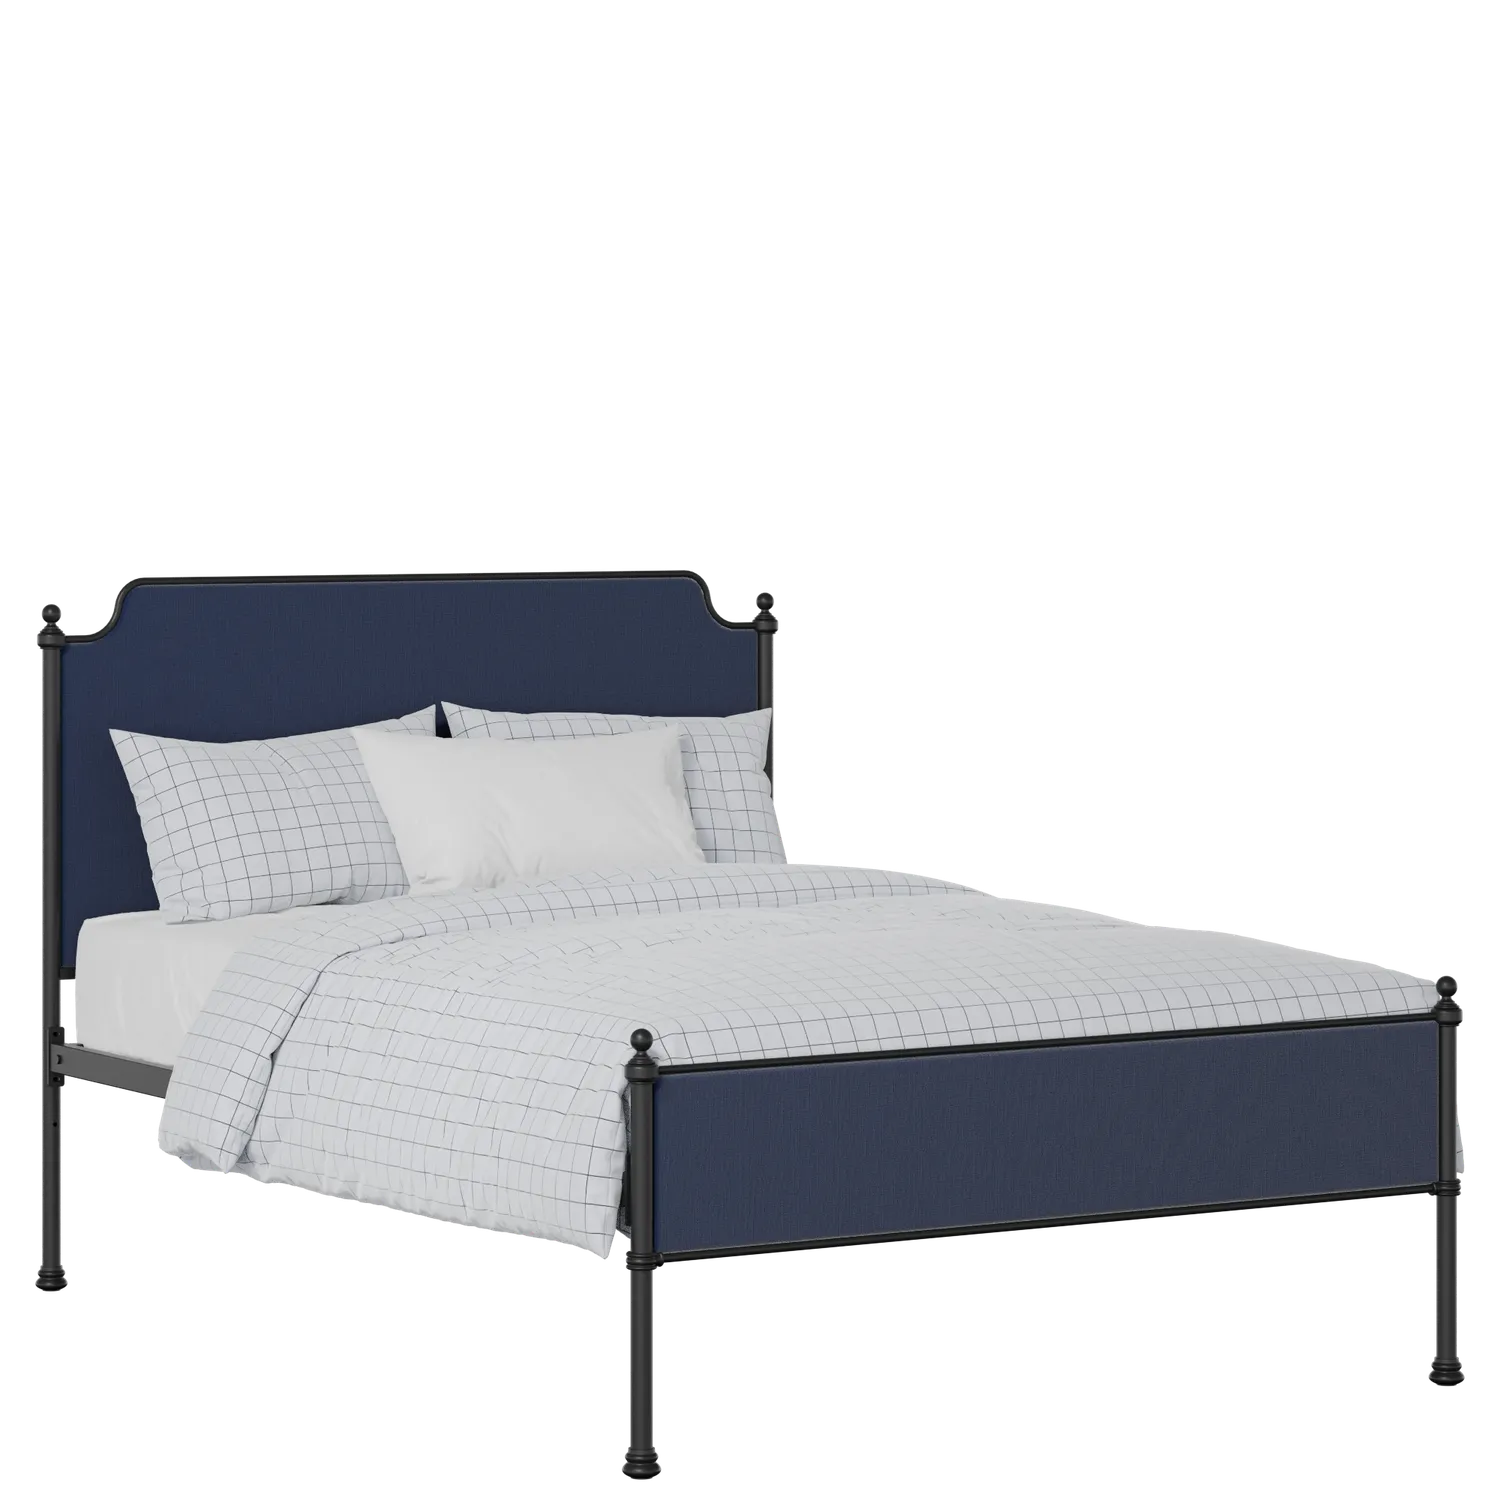 Miranda Slim iron/metal upholstered bed in black with blue fabric